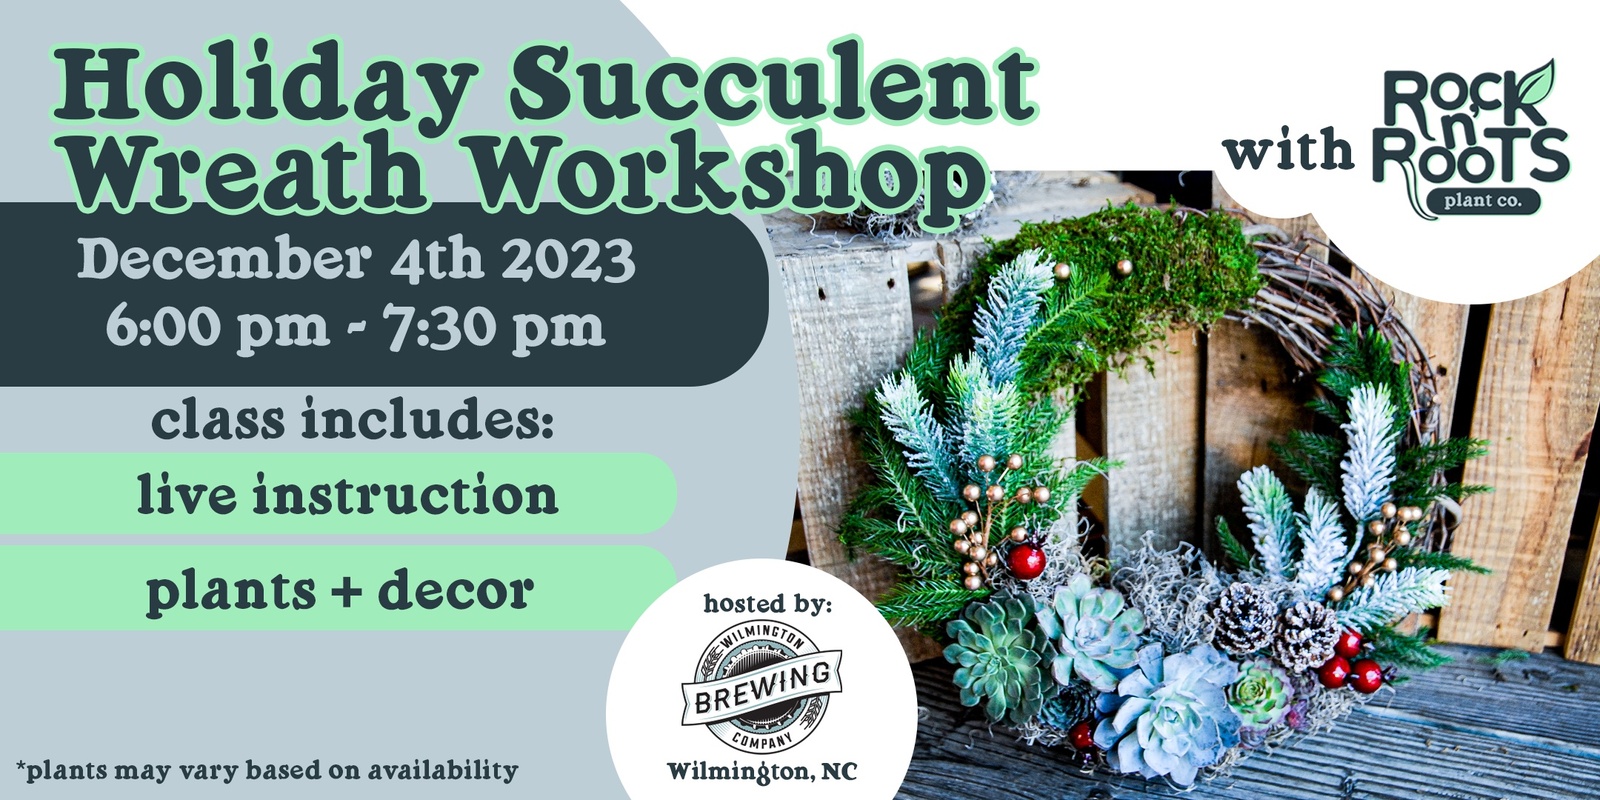 Banner image for Holiday Succulent Wreath Workshop at Wilmington Brewing (Wilmington, NC)